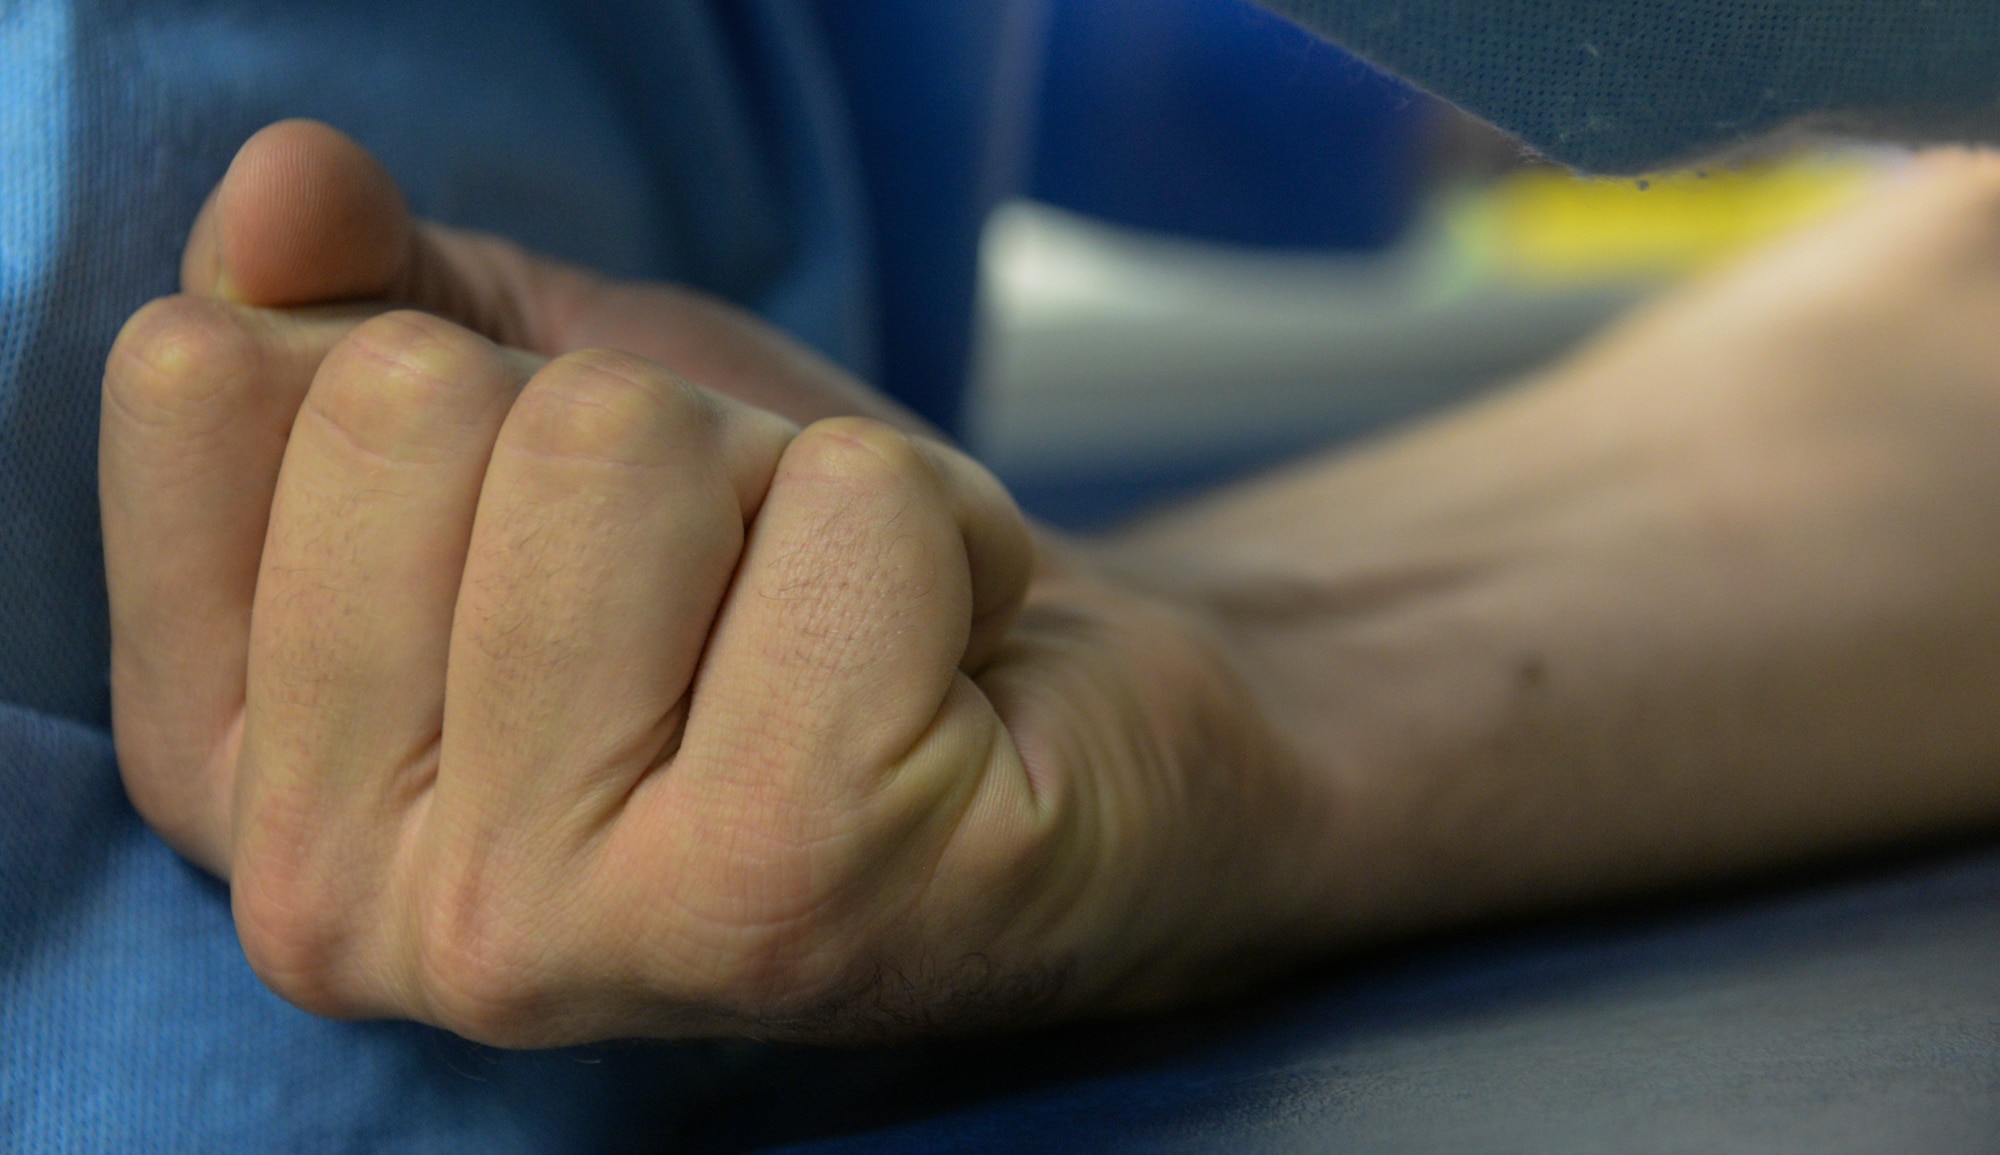 A patient clenches theirfist during a pre-deployment blood drawing at Beale Air Force Base, California, Sept. 24, 2019. Pre-deployment medical appointments are standard to ensure proper care of all Airmen. (U.S. Air Force photo by Staff Sgt. Taylor White)